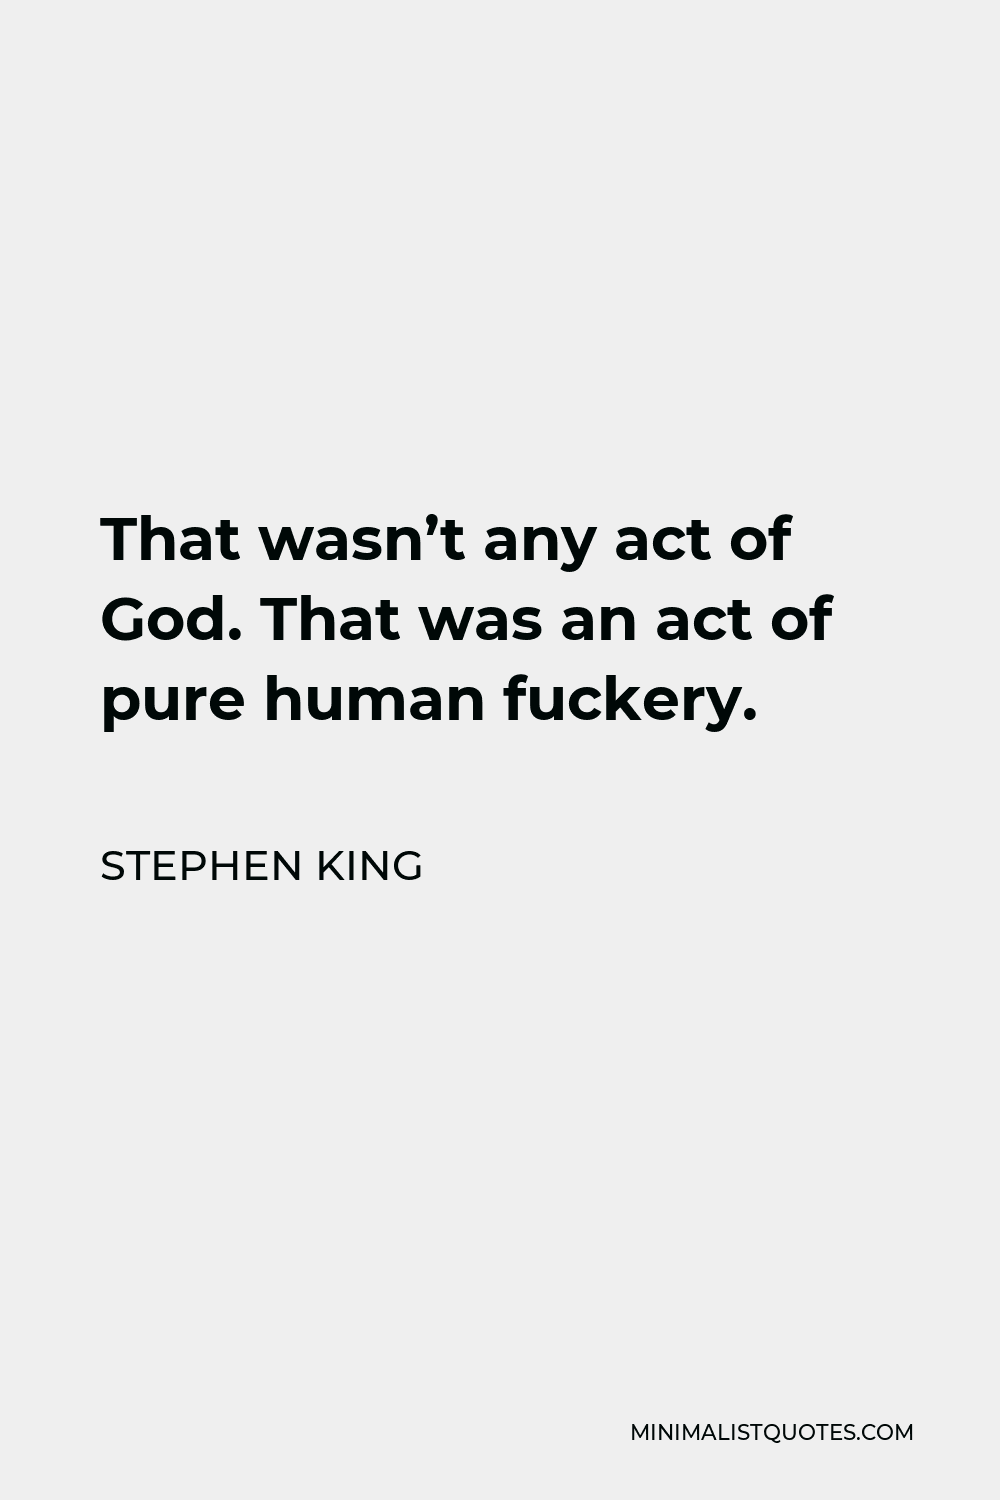 Stephen King Quote - That wasn’t any act of God. That was an act of pure human fuckery.